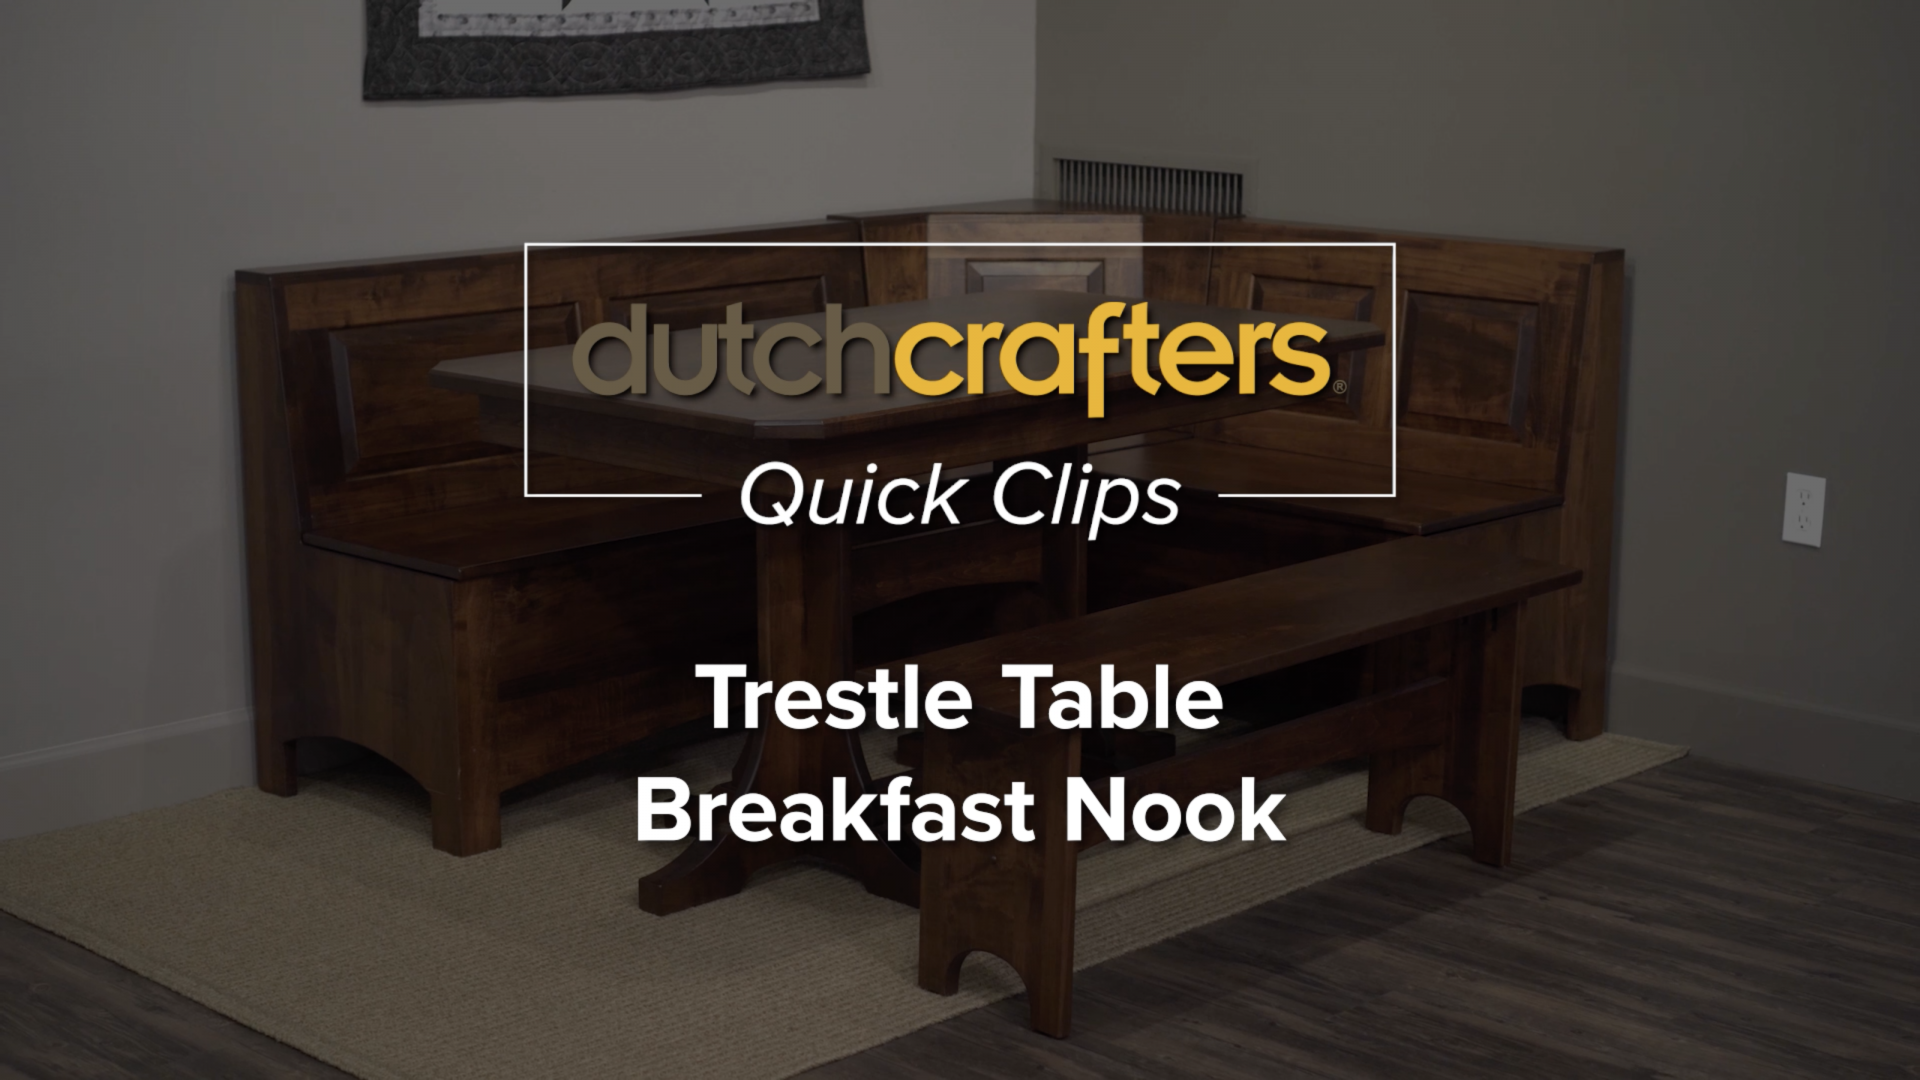 The title screen for a video featuring the DutchCrafters Trestle Table Breakfast Nook